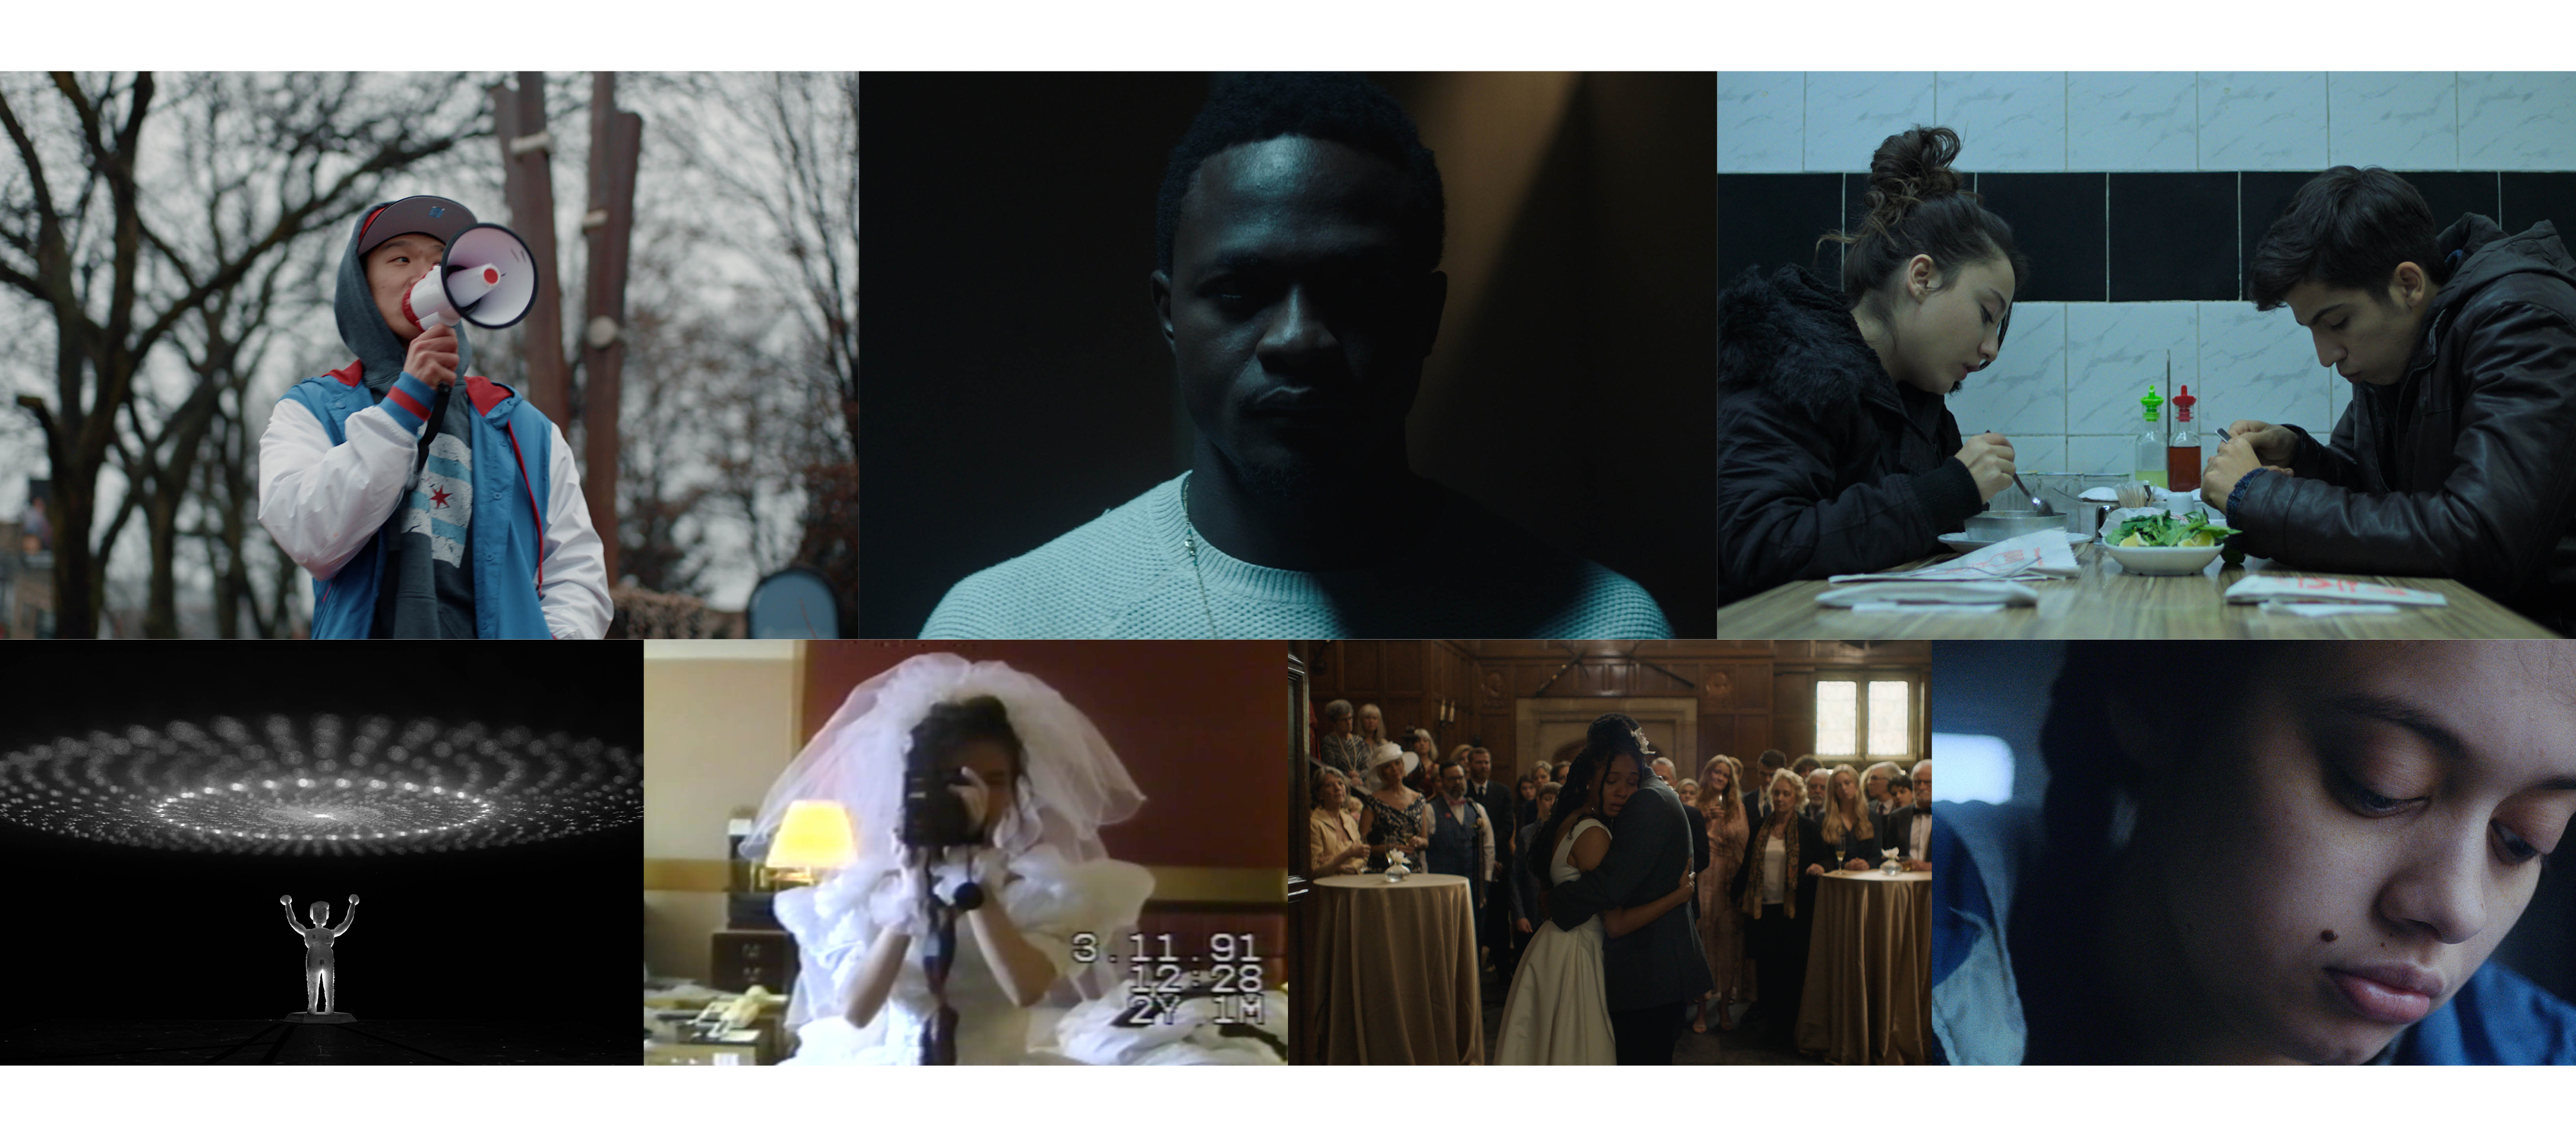 A collection of eight images from the Sundance Film Festival Shorts program